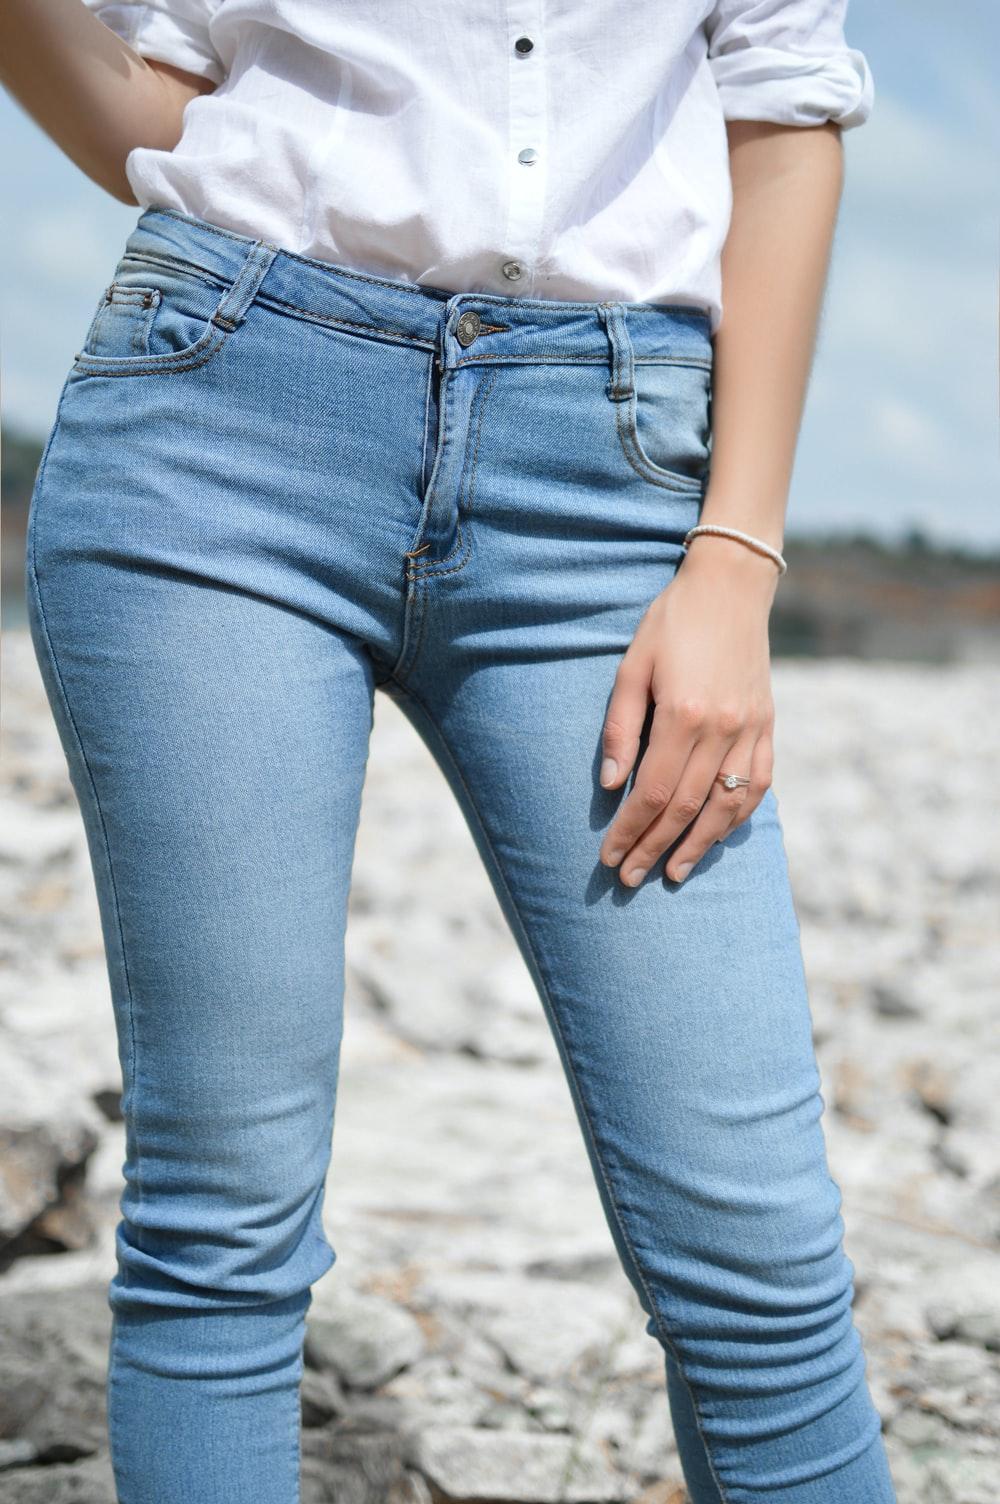 100 Jeans Pictures  Download Free Images on Unsplash